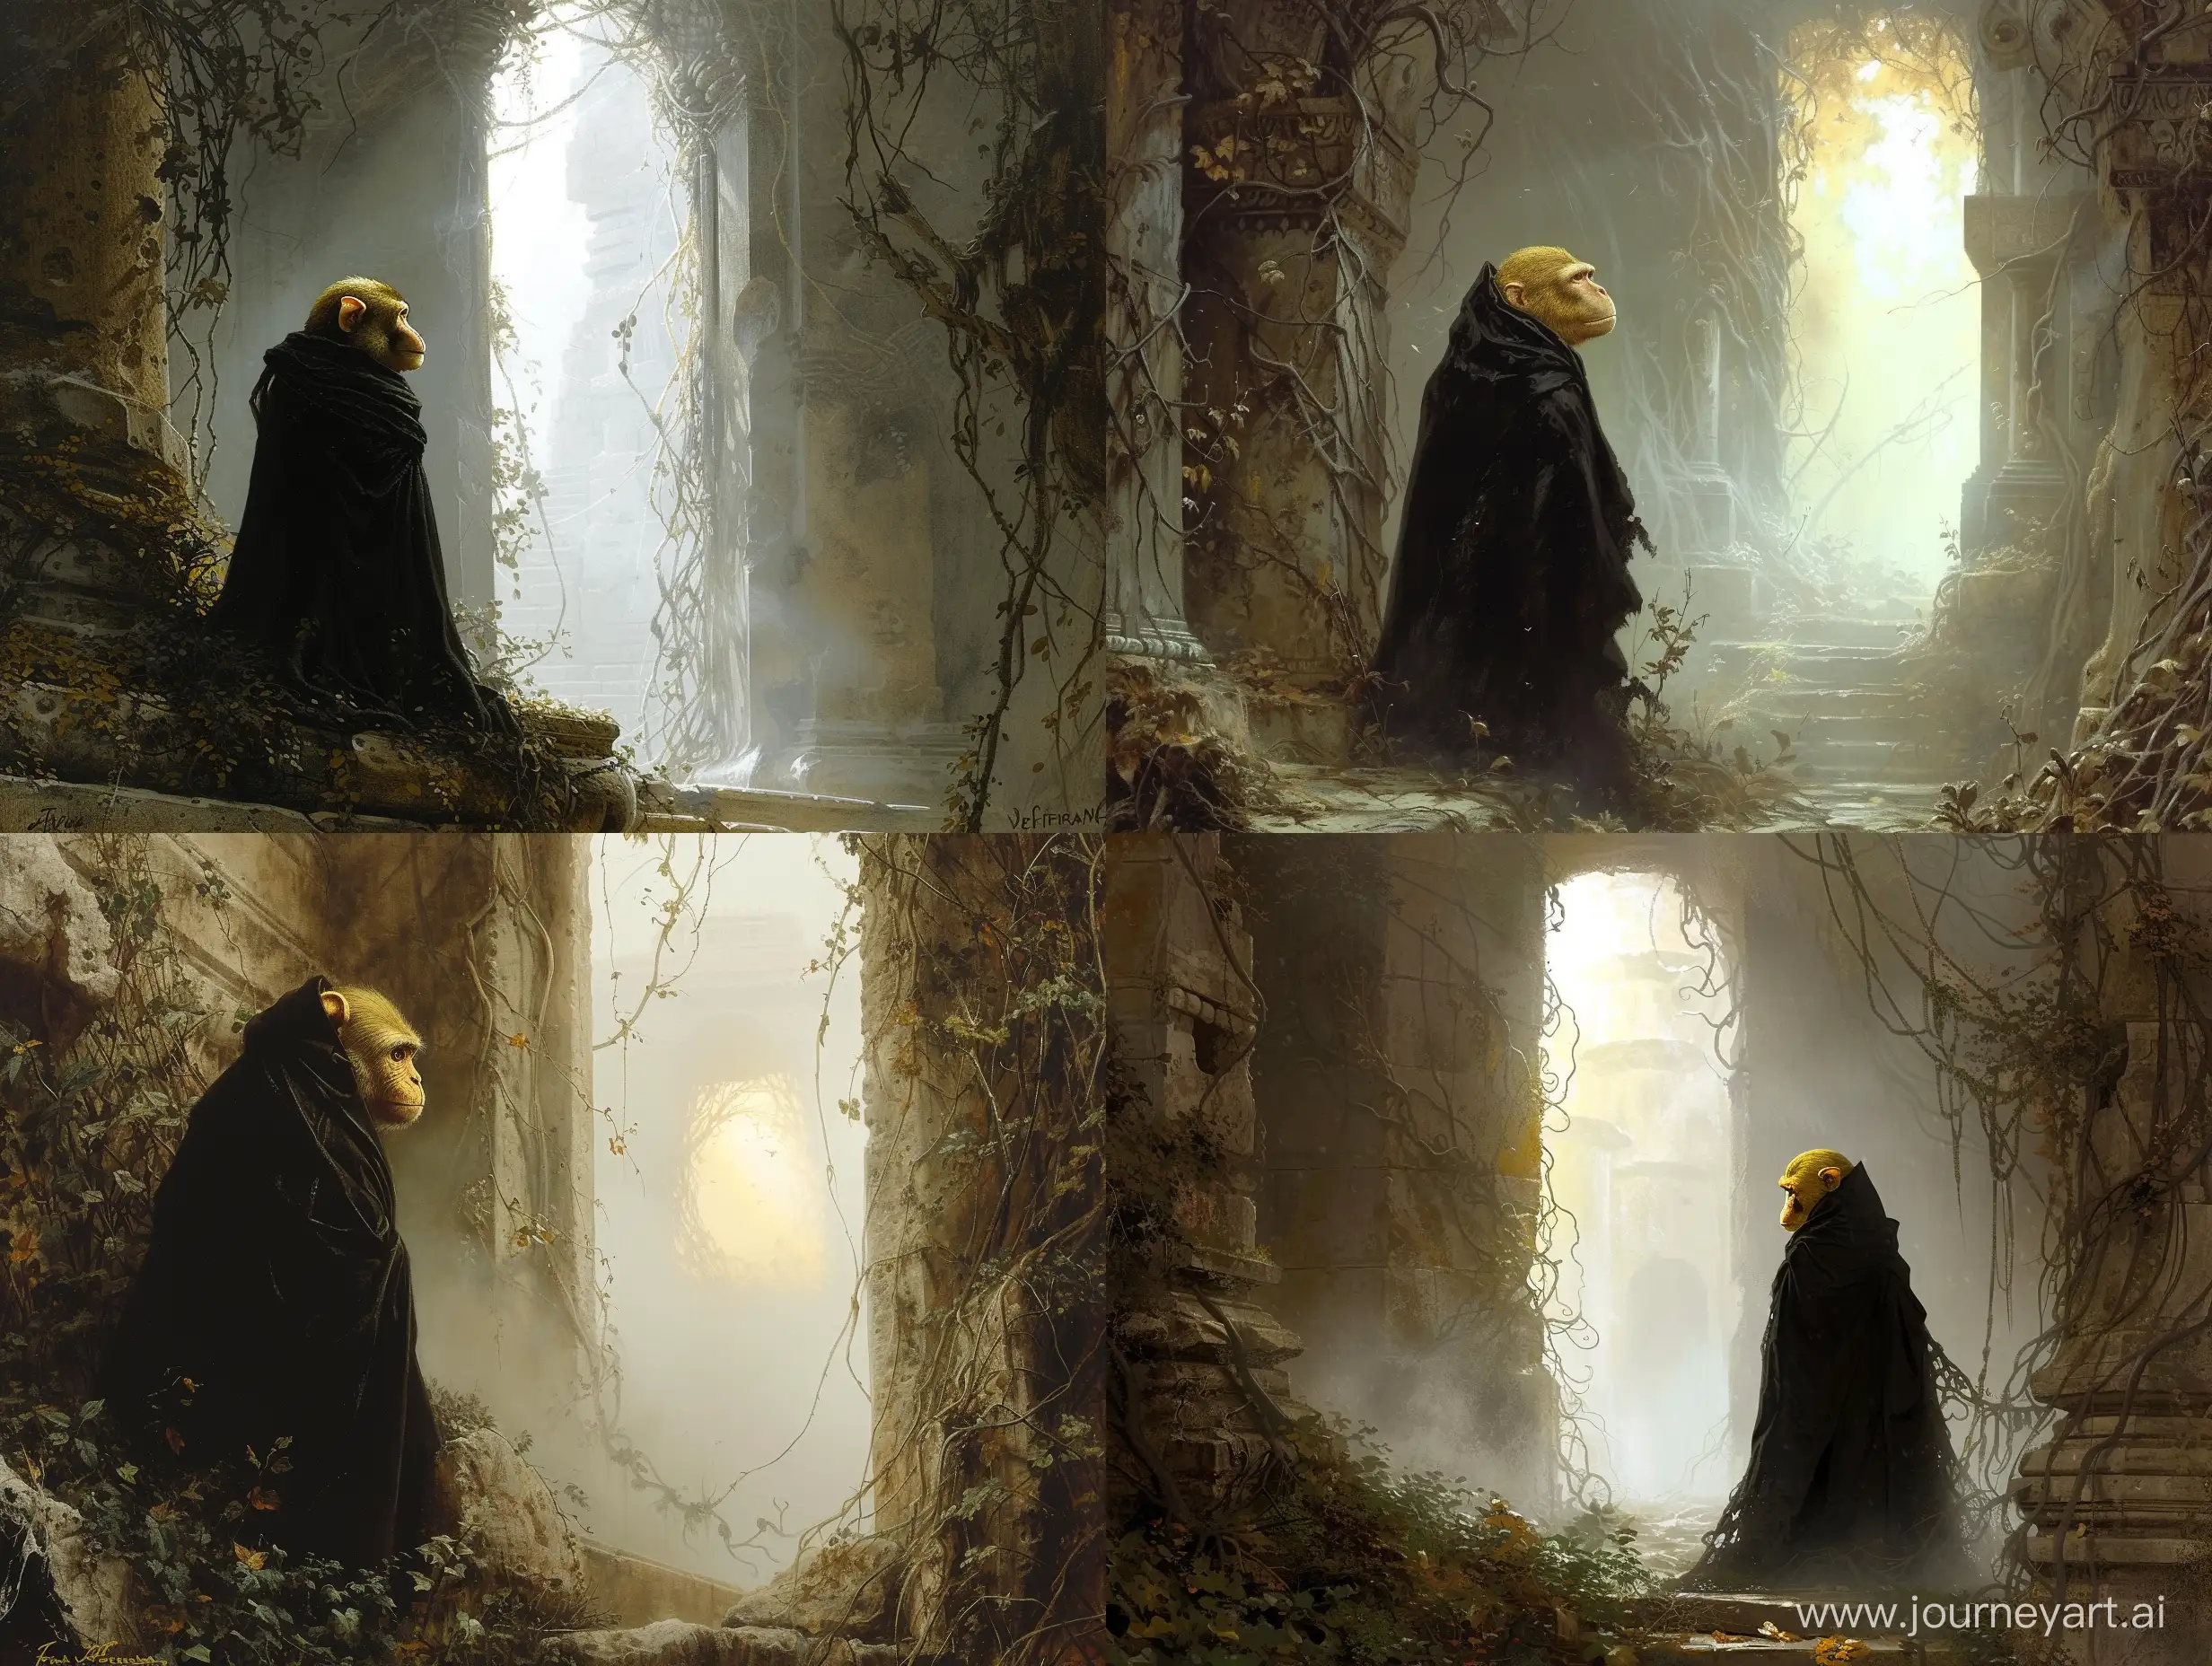 Frank frazetta : 1800s derailed romanticism painting: A small golden snub-nosed monkey wearing a black cloak stands in a foggy stone temple covered in undergrowth and vines, looking out an opening into sunlight. Background: Rembrandt van rijn, baroque, Thomas Moran 